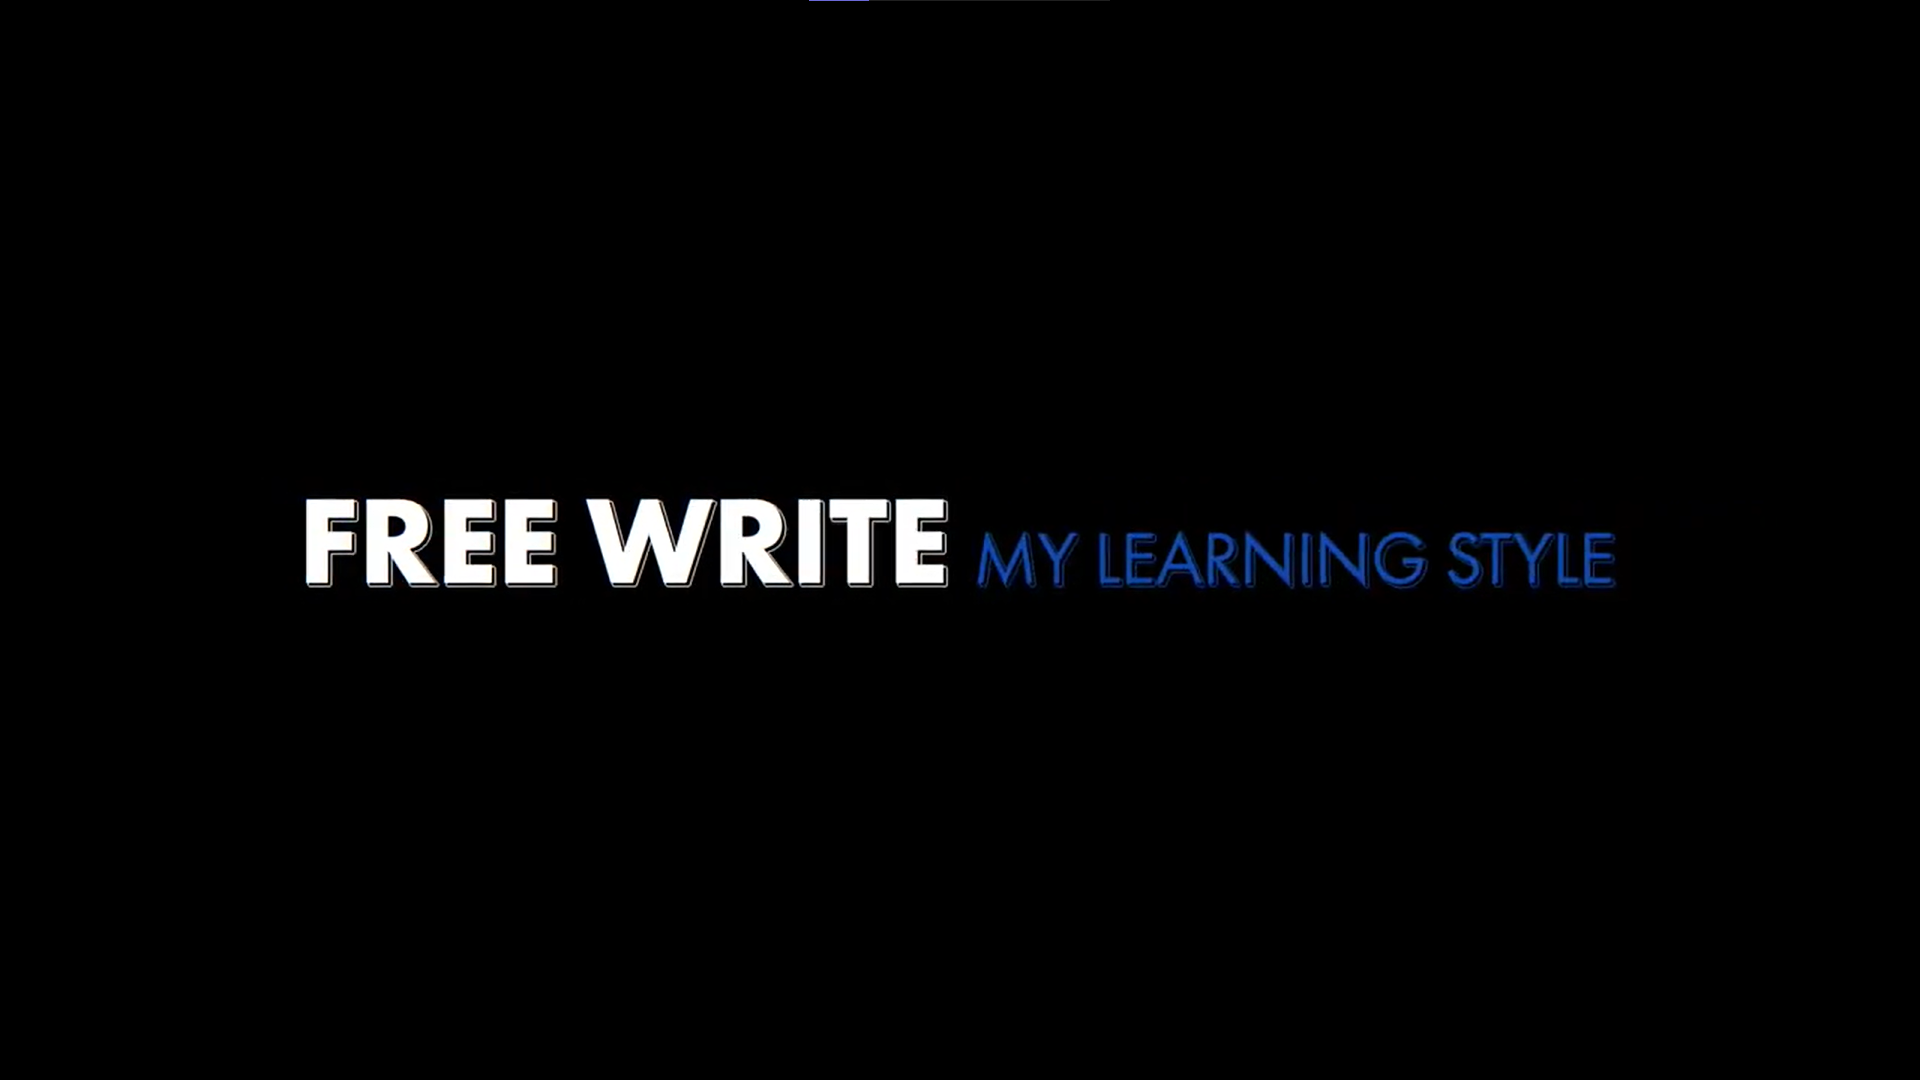 "My Learning Style" Free Write Title Card